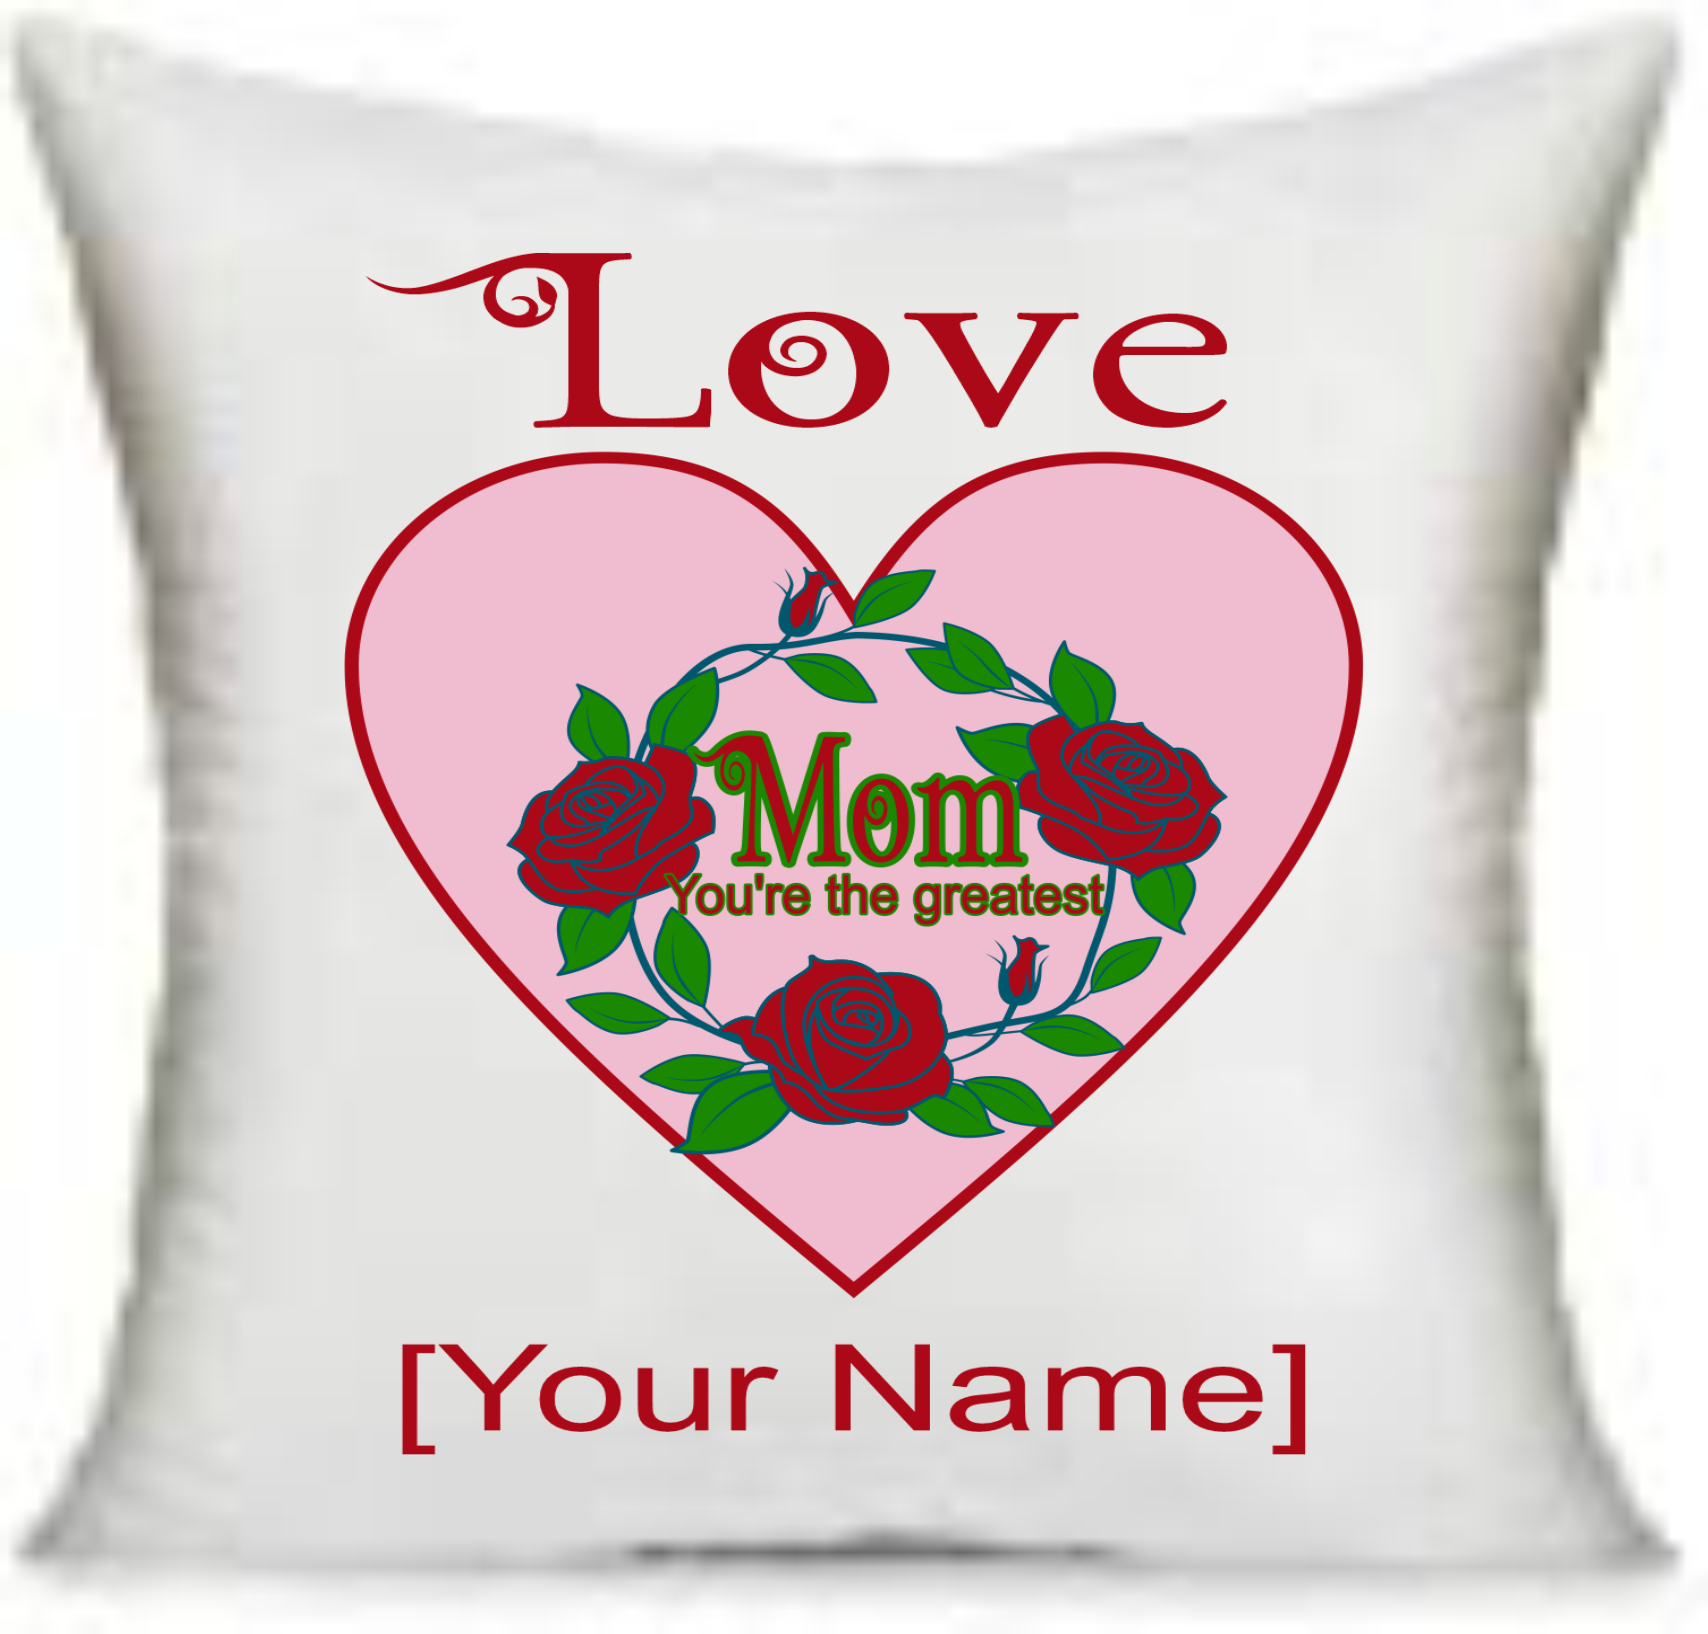 Mother's Day made with sublimation printing